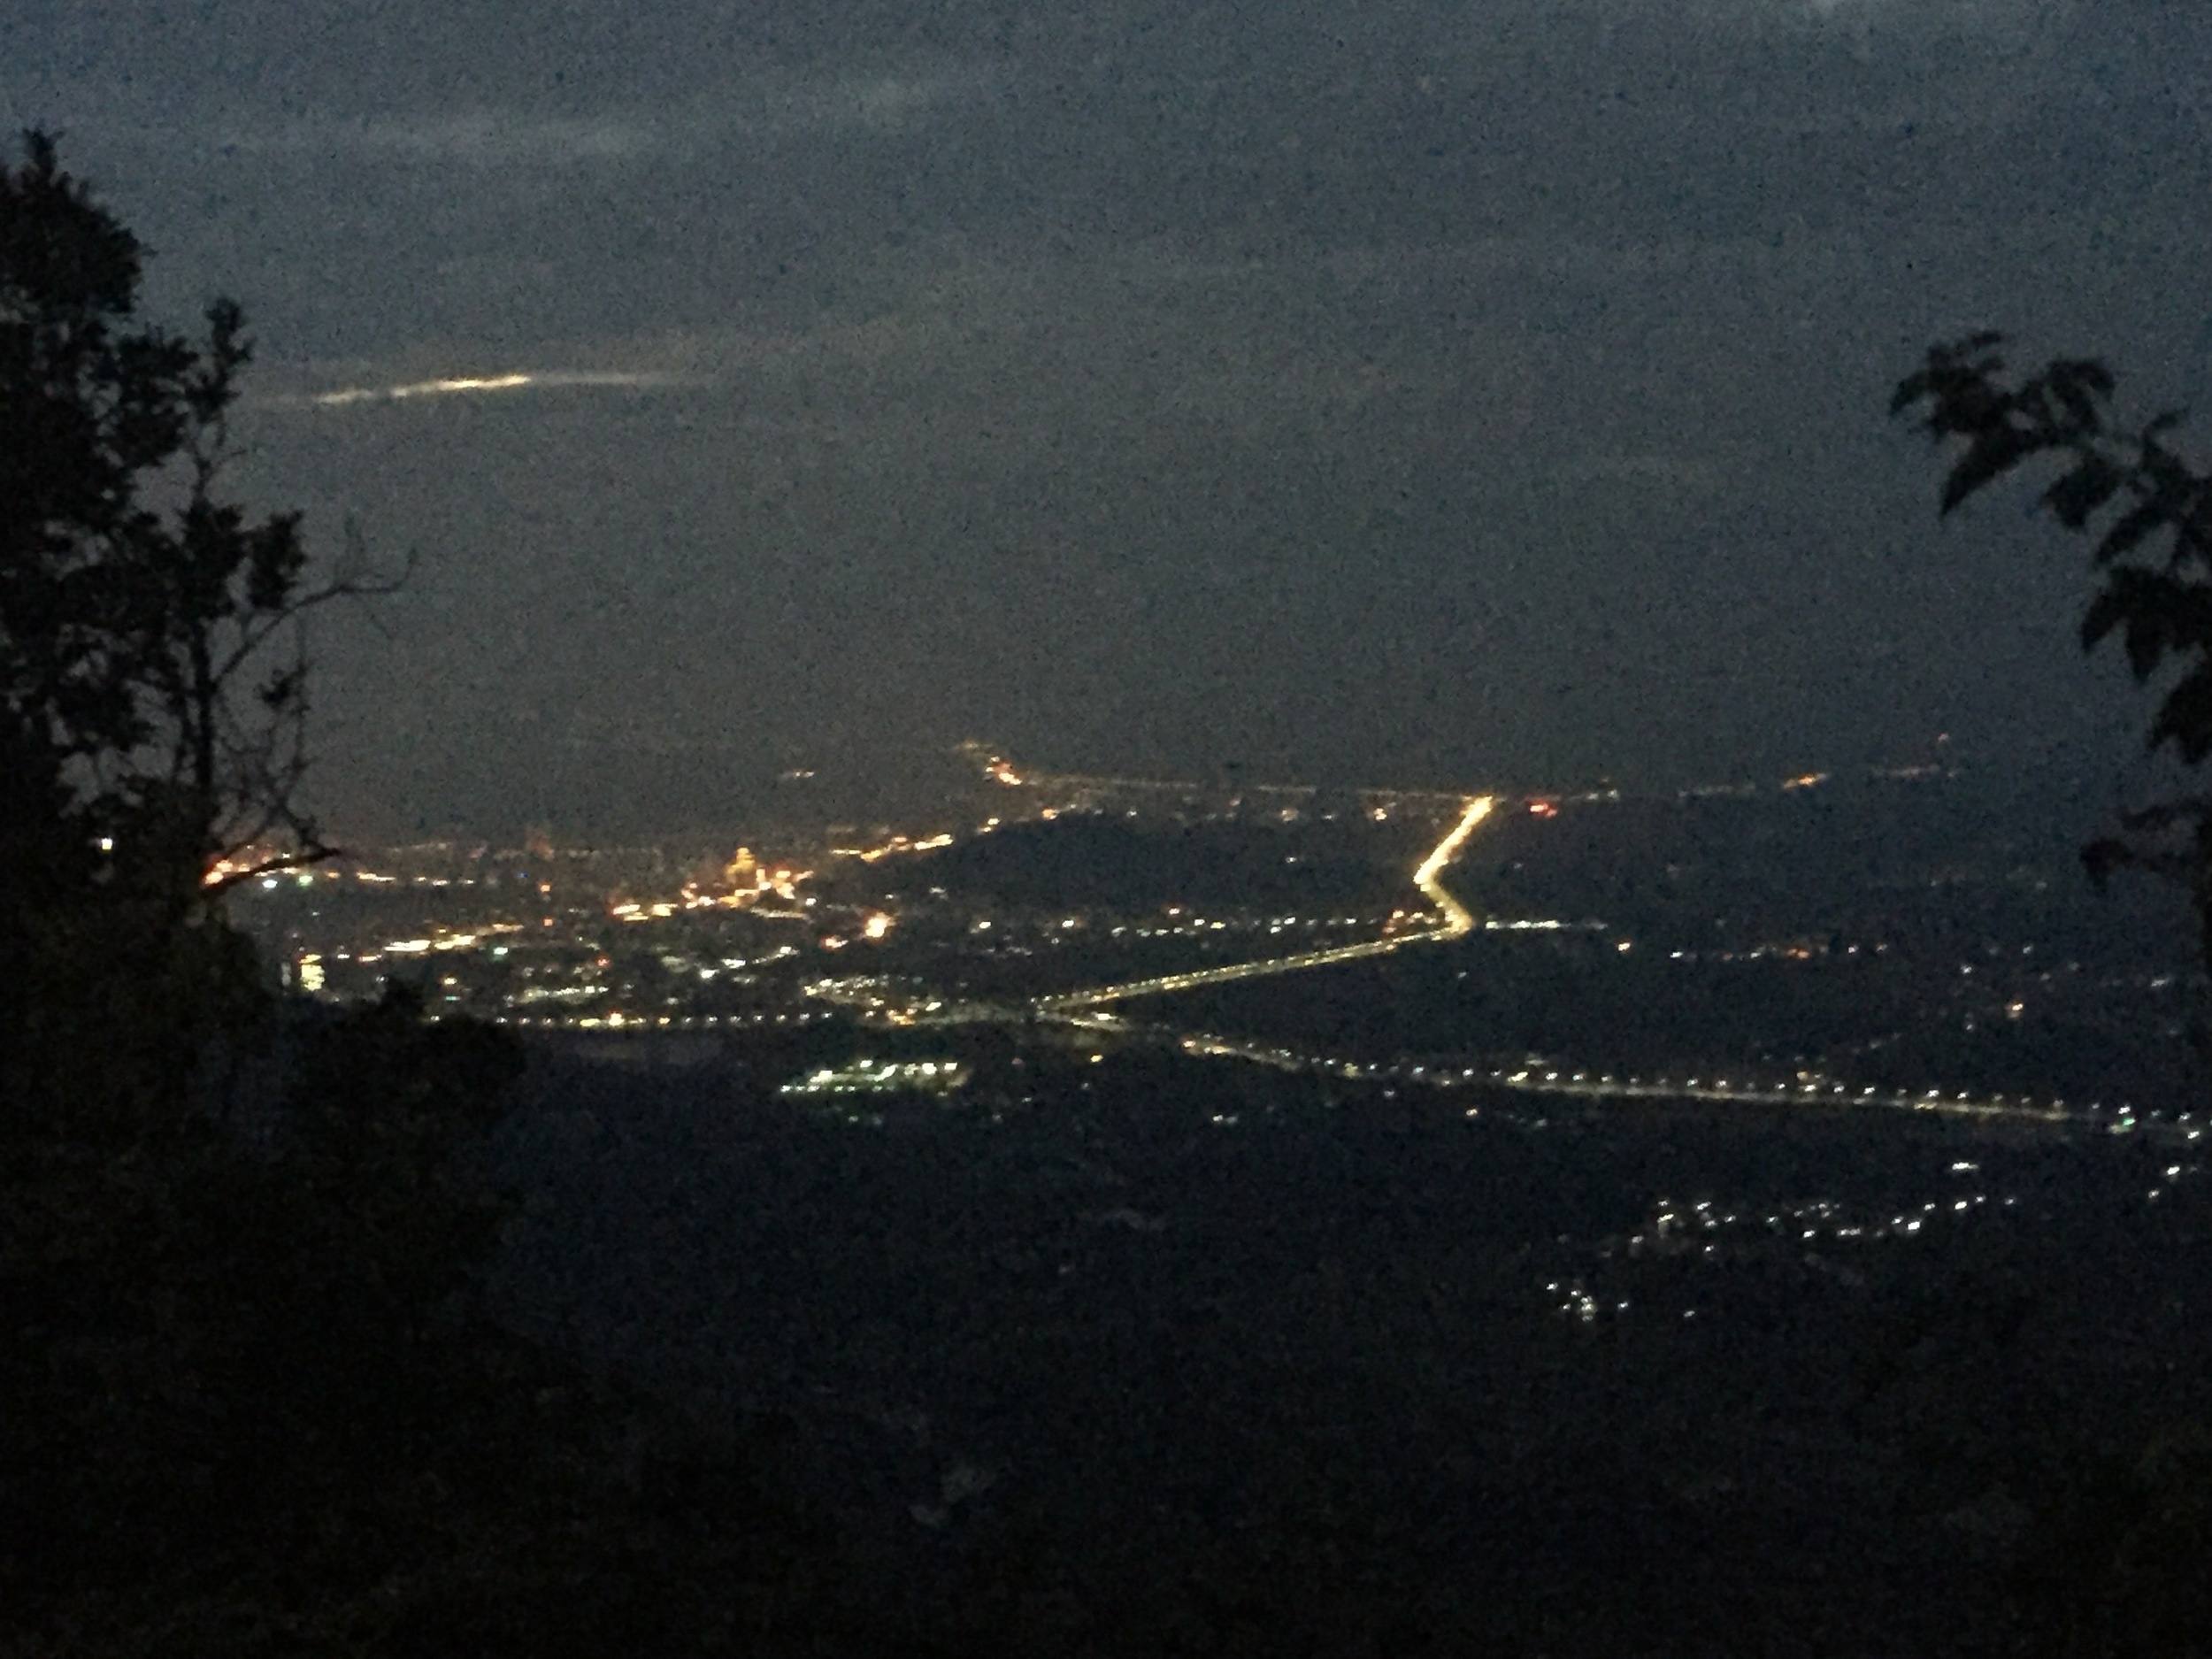  The city lights of Pingshan. &nbsp; 